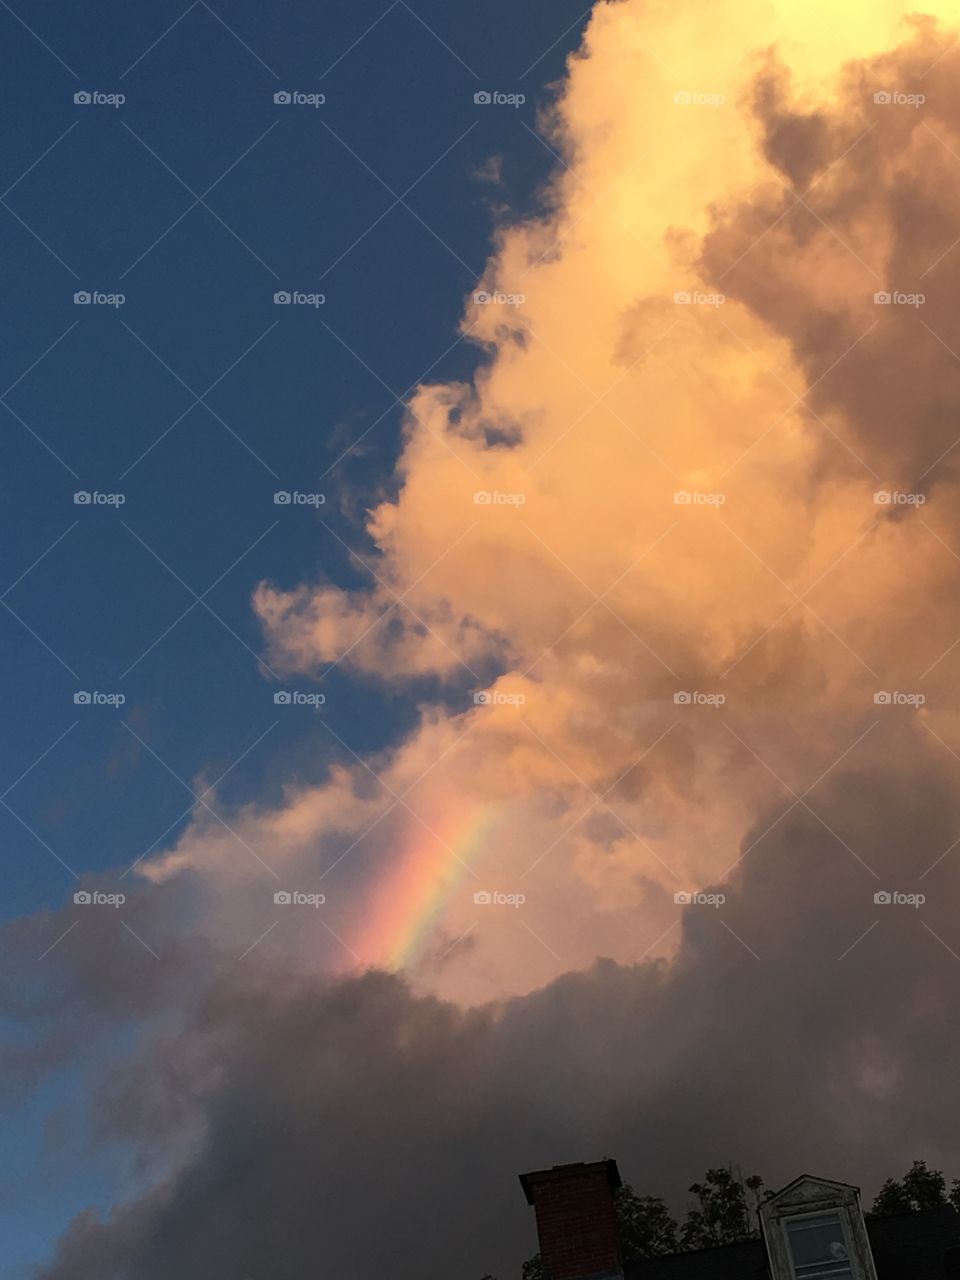 Rainbow hidden in between the clouds after rainstorm. Clouds look like smoke trying to eat it.